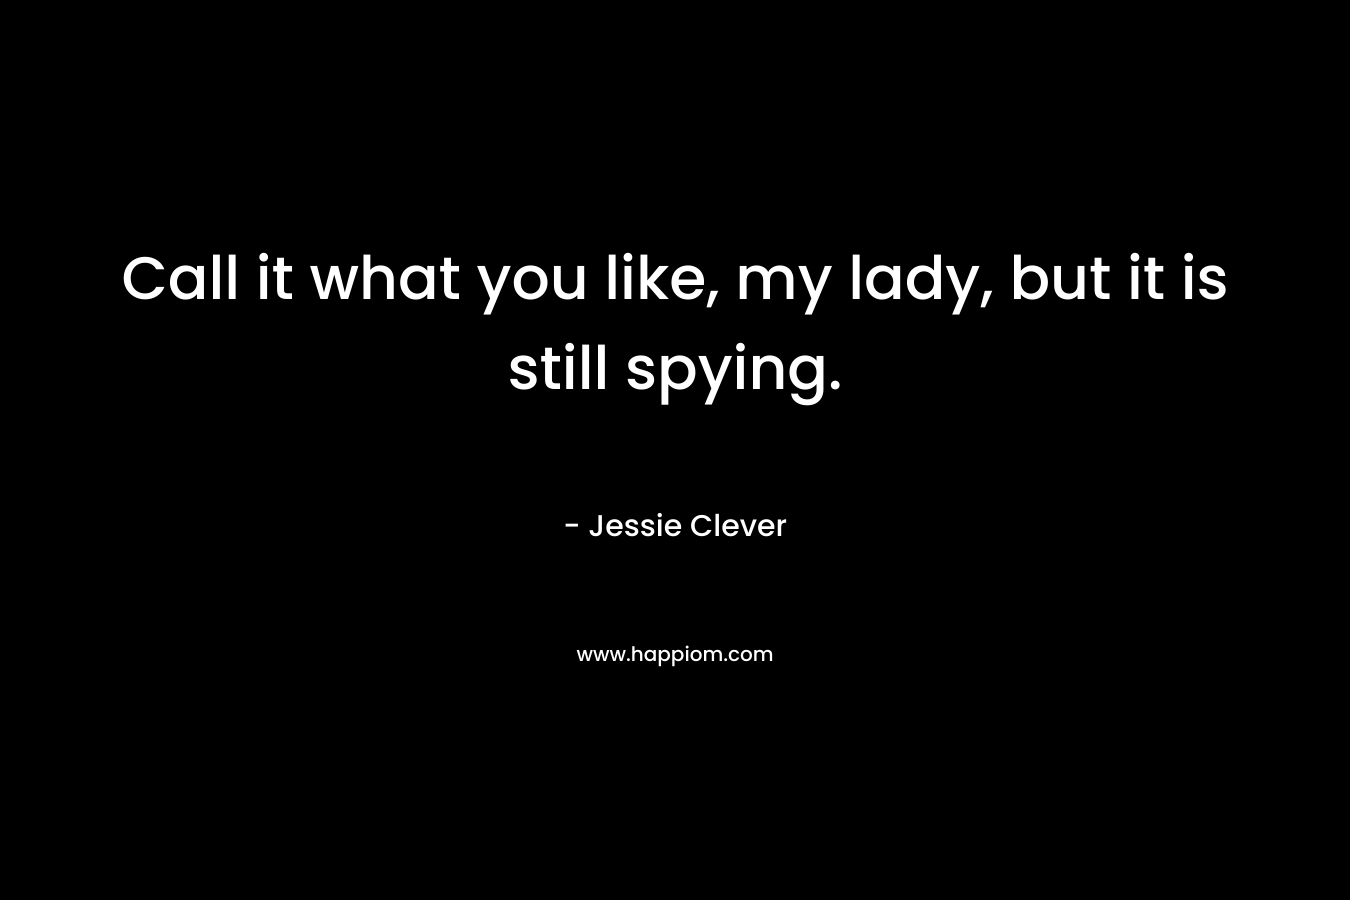 Call it what you like, my lady, but it is still spying. – Jessie Clever